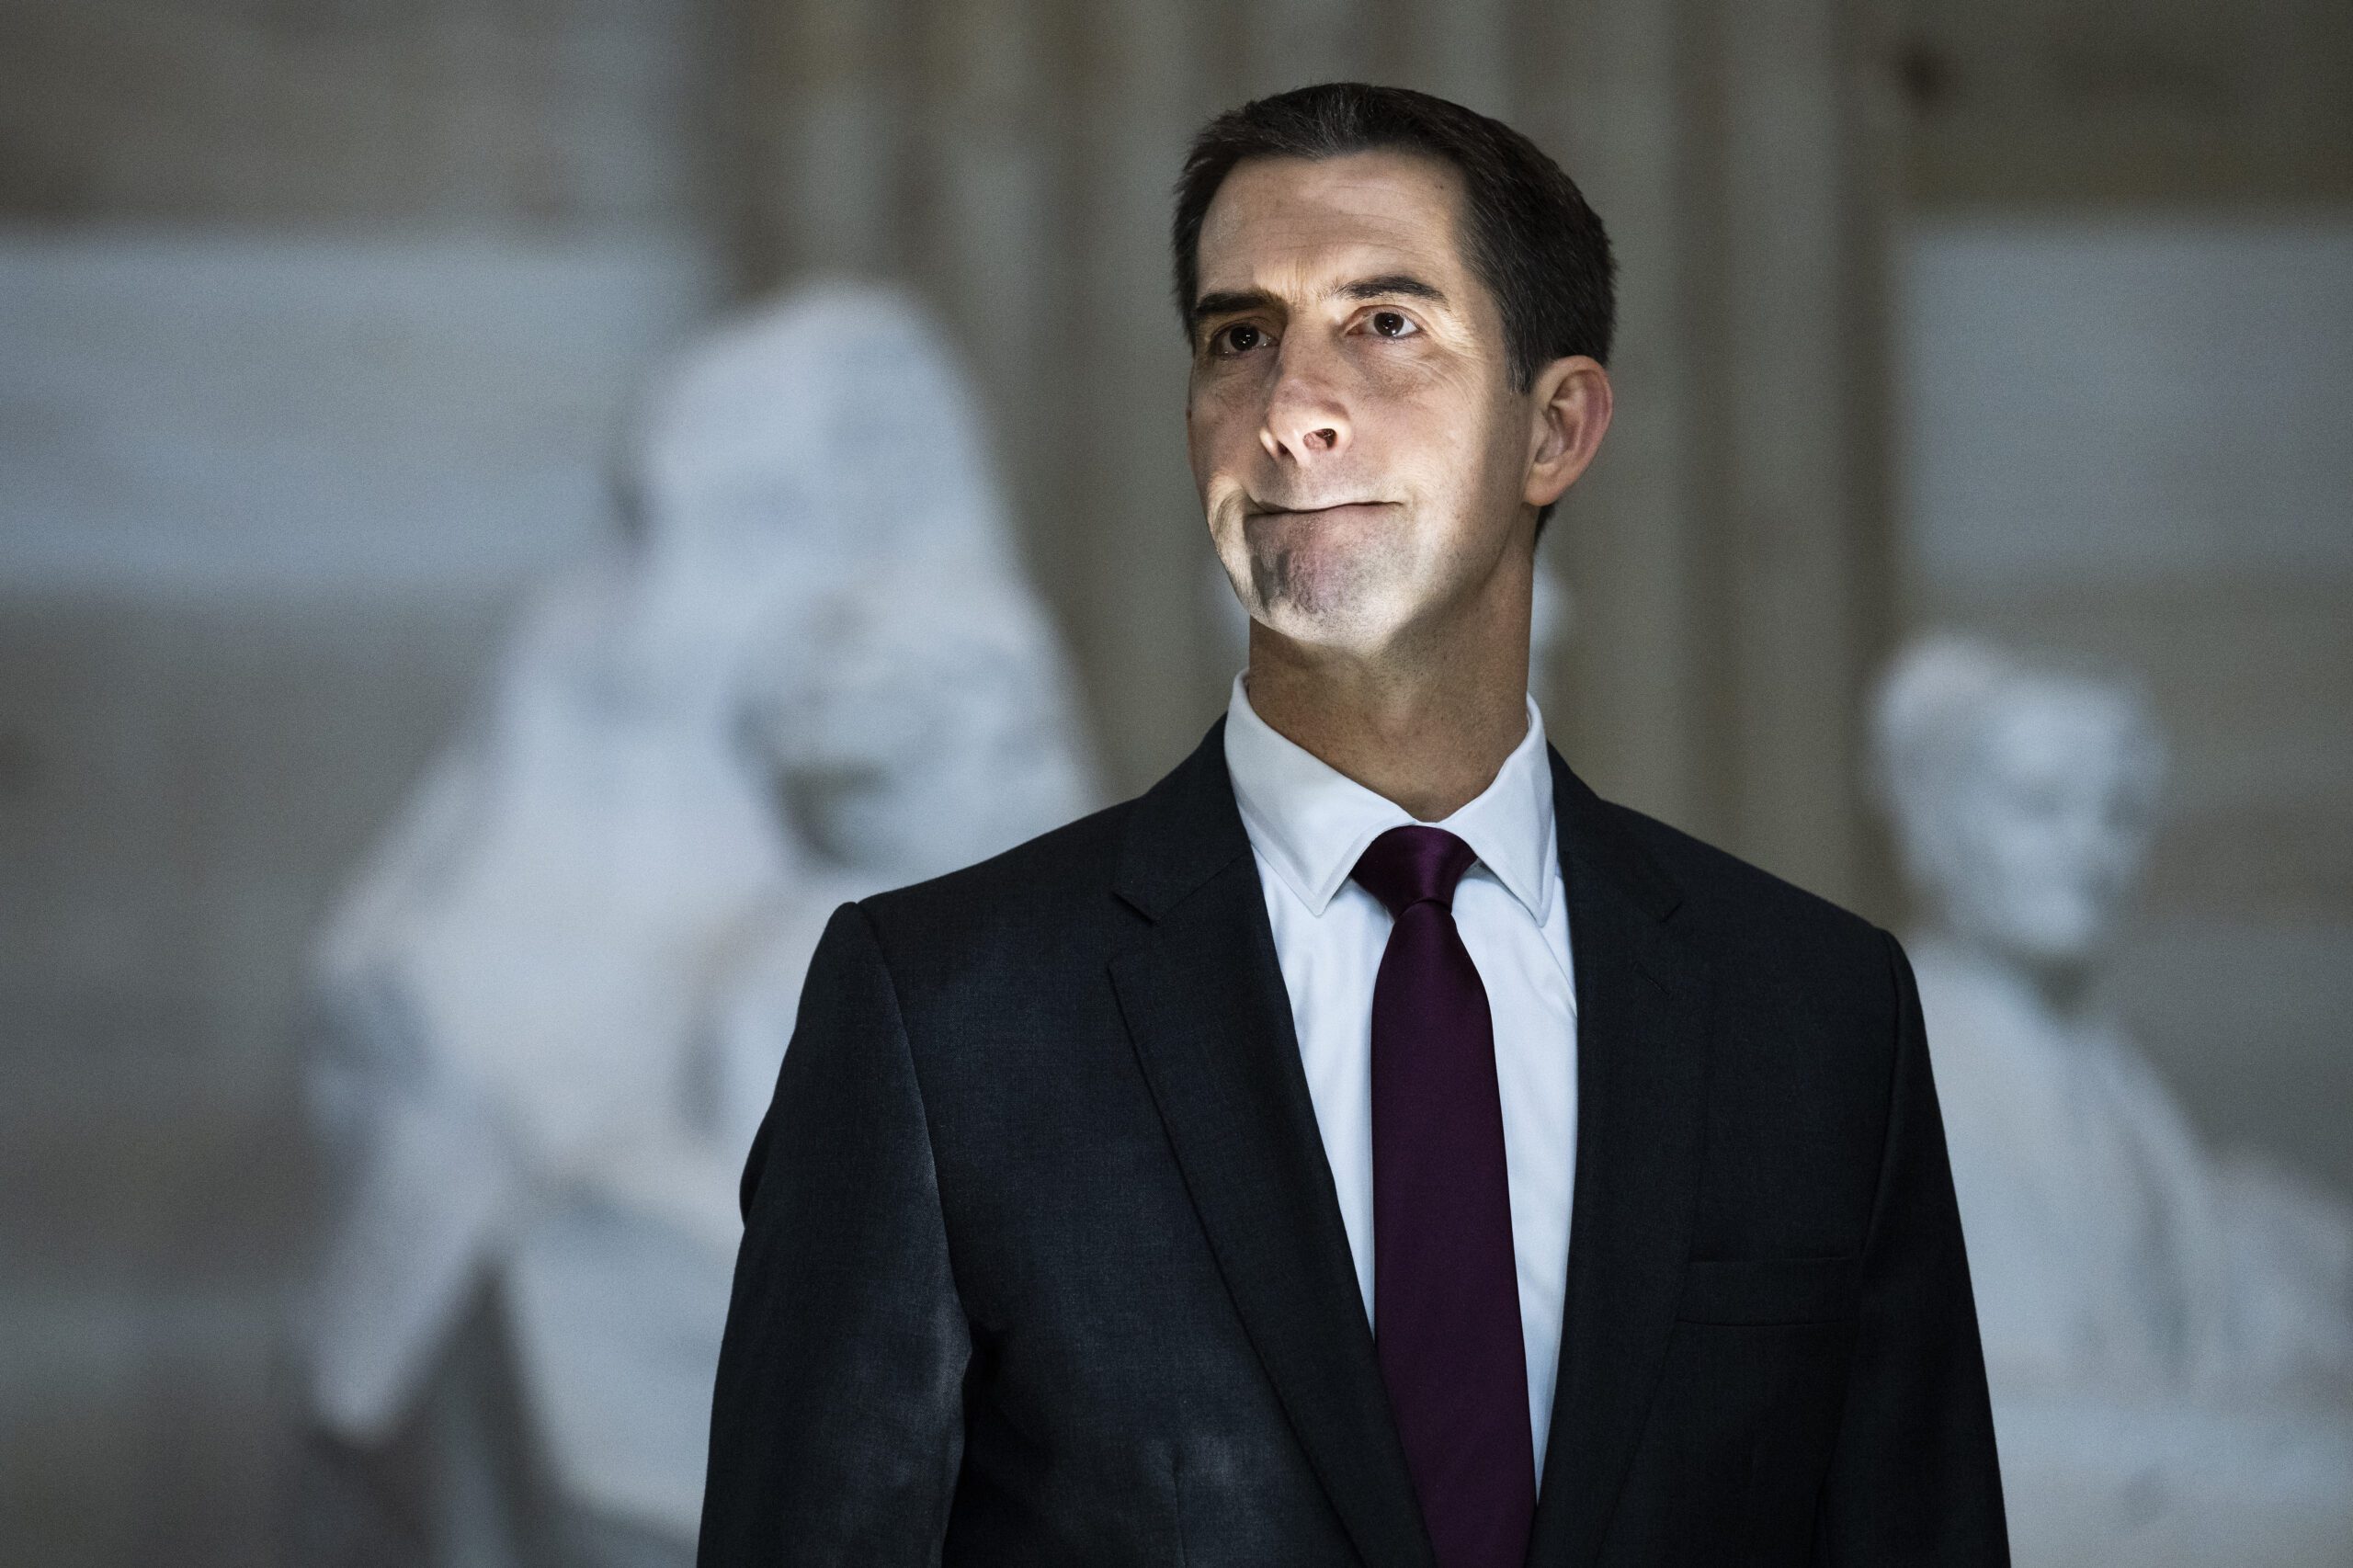 cotton-passes-on-2024-presidential-run-after-considering-campaign